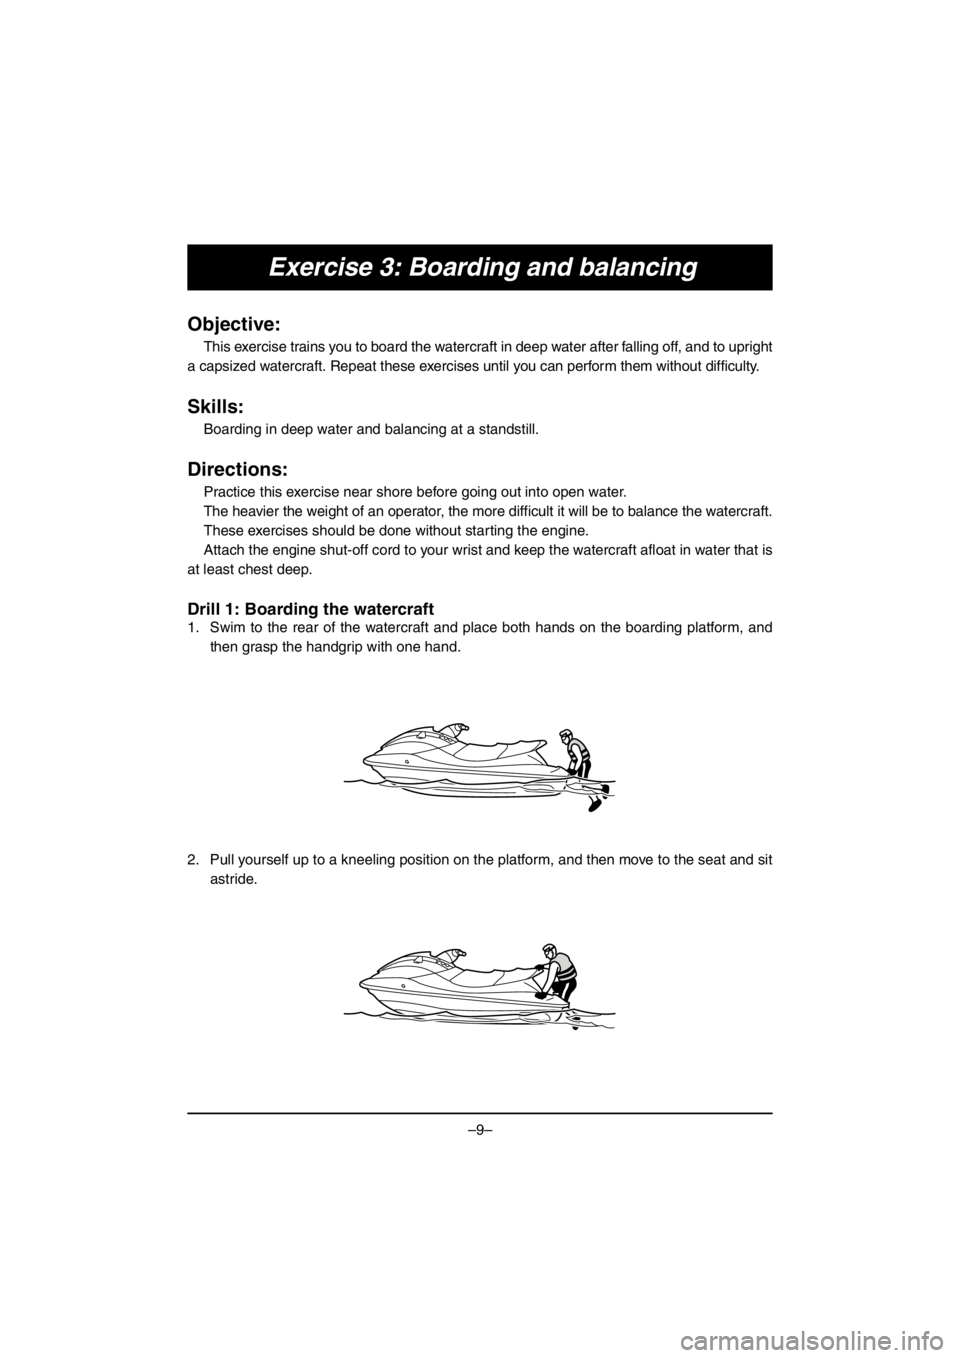 YAMAHA V1 2016  Notices Demploi (in French) –9–
Exercise 3: Boarding and balancing
Objective:
This exercise trains you to board the watercraft in deep water after falling off, and to upright
a capsized watercraft. Repeat these exercises unt